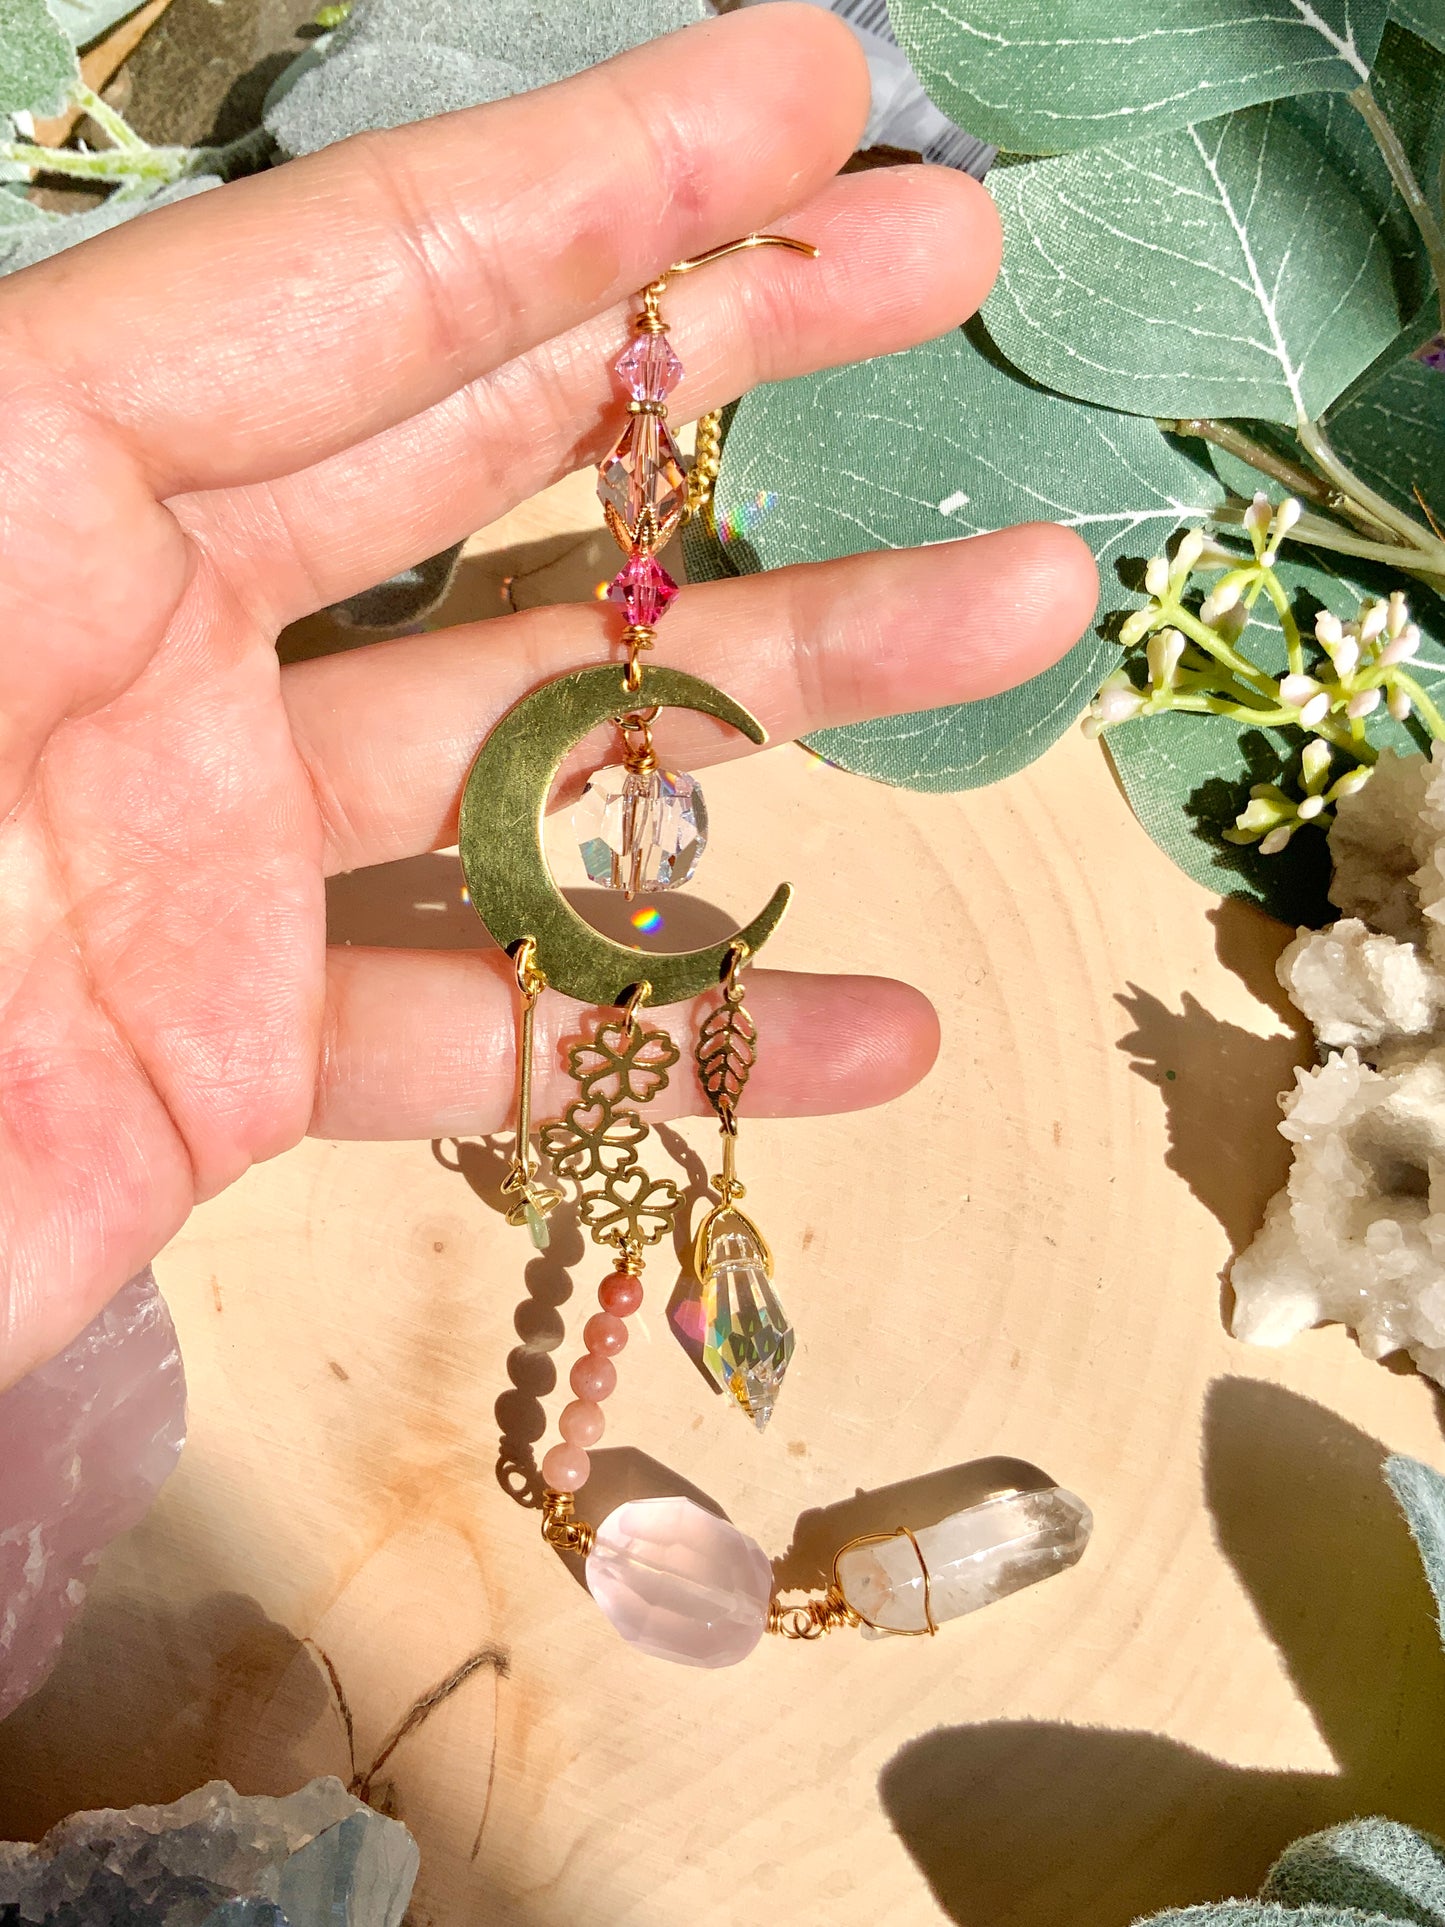 Cherry Blossom Car Charm with Rose Quartz, Pink Lepidolite gemstone with ombré Crystal prisms for car mirror accessories